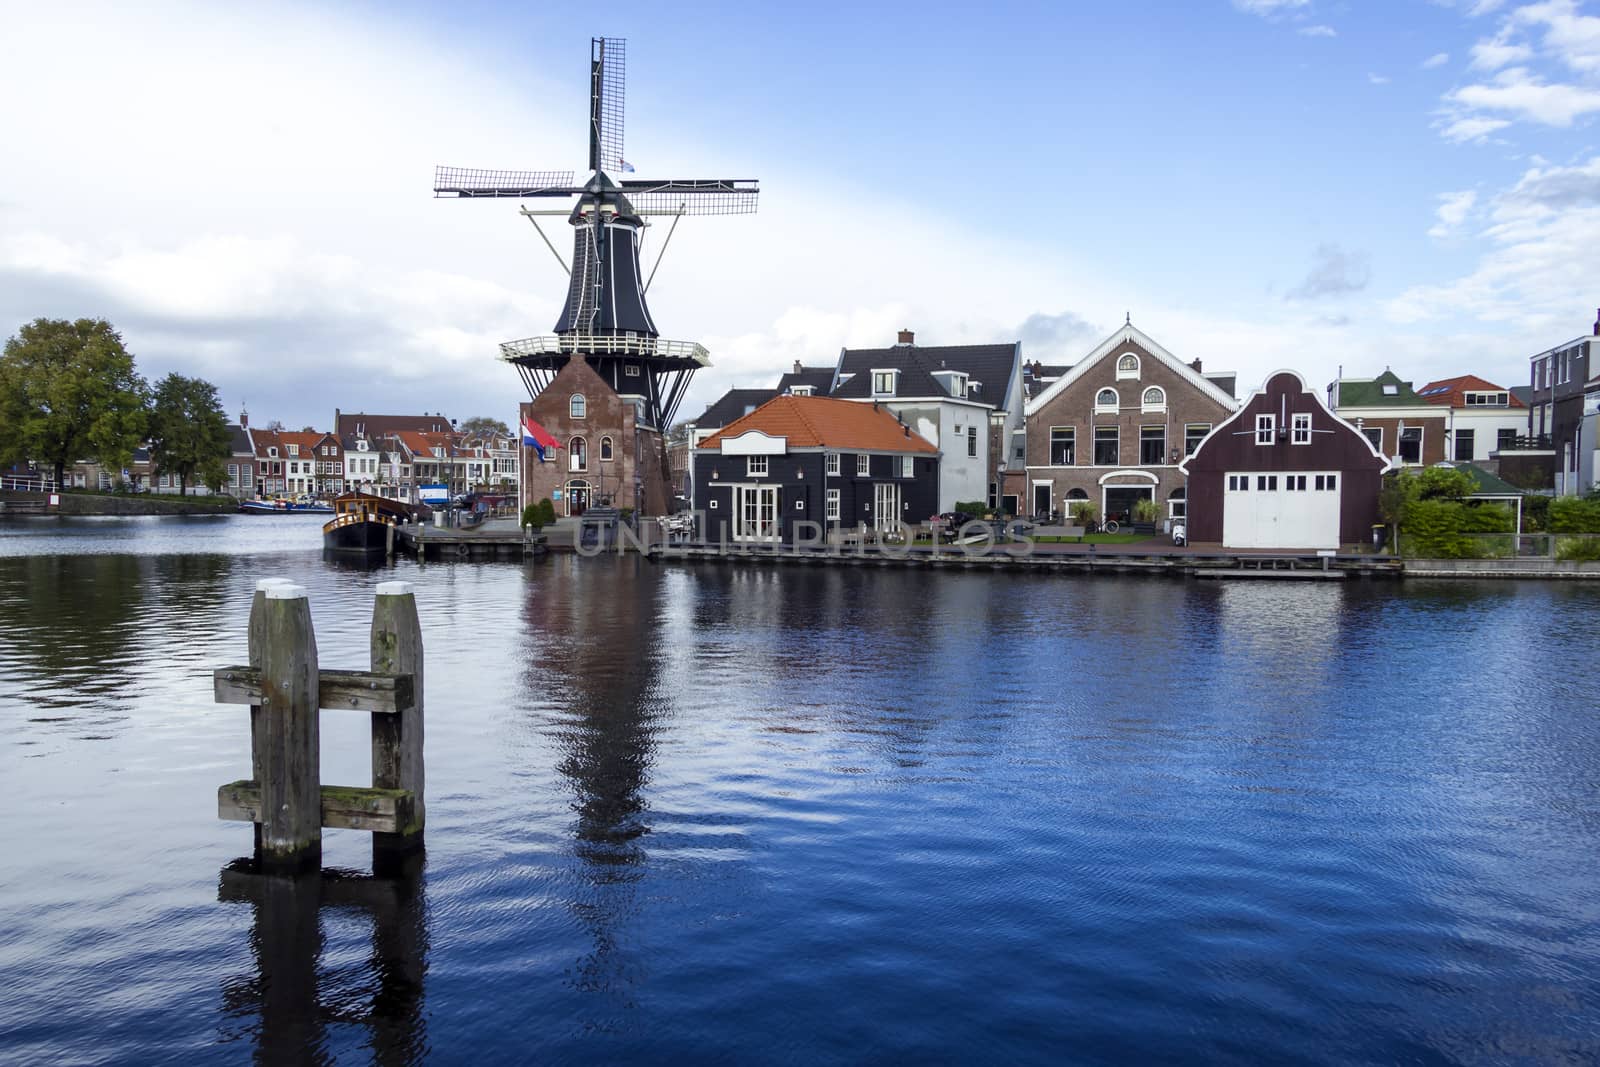 Picturesque landscape with windmill. Haarlem, Holland